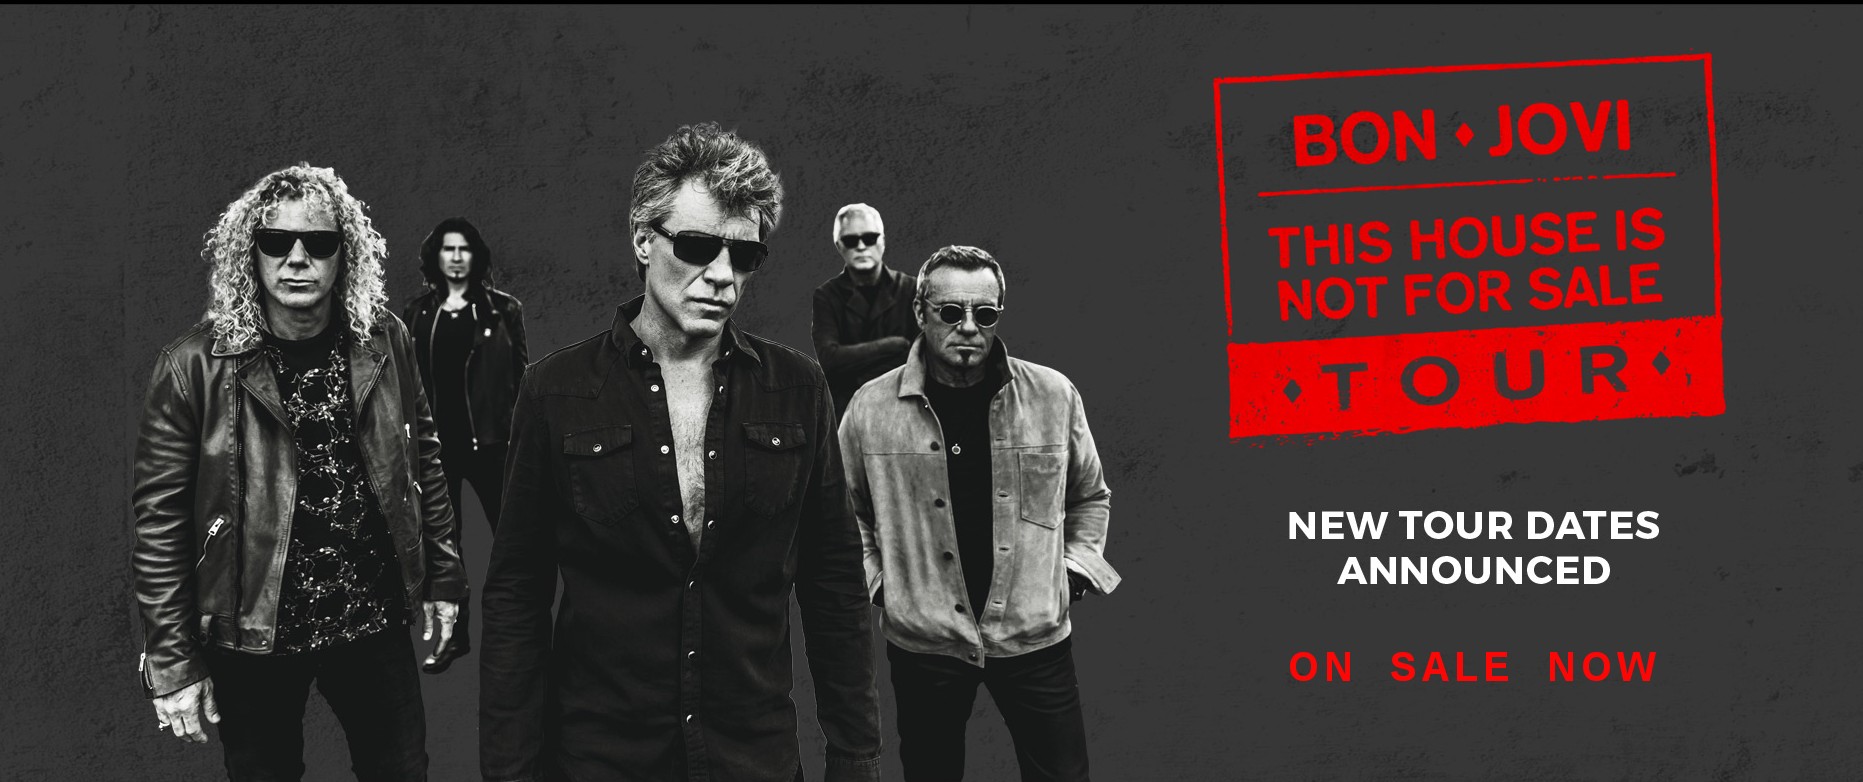 More dates added to Bon Jovi’s North American Tour 2017